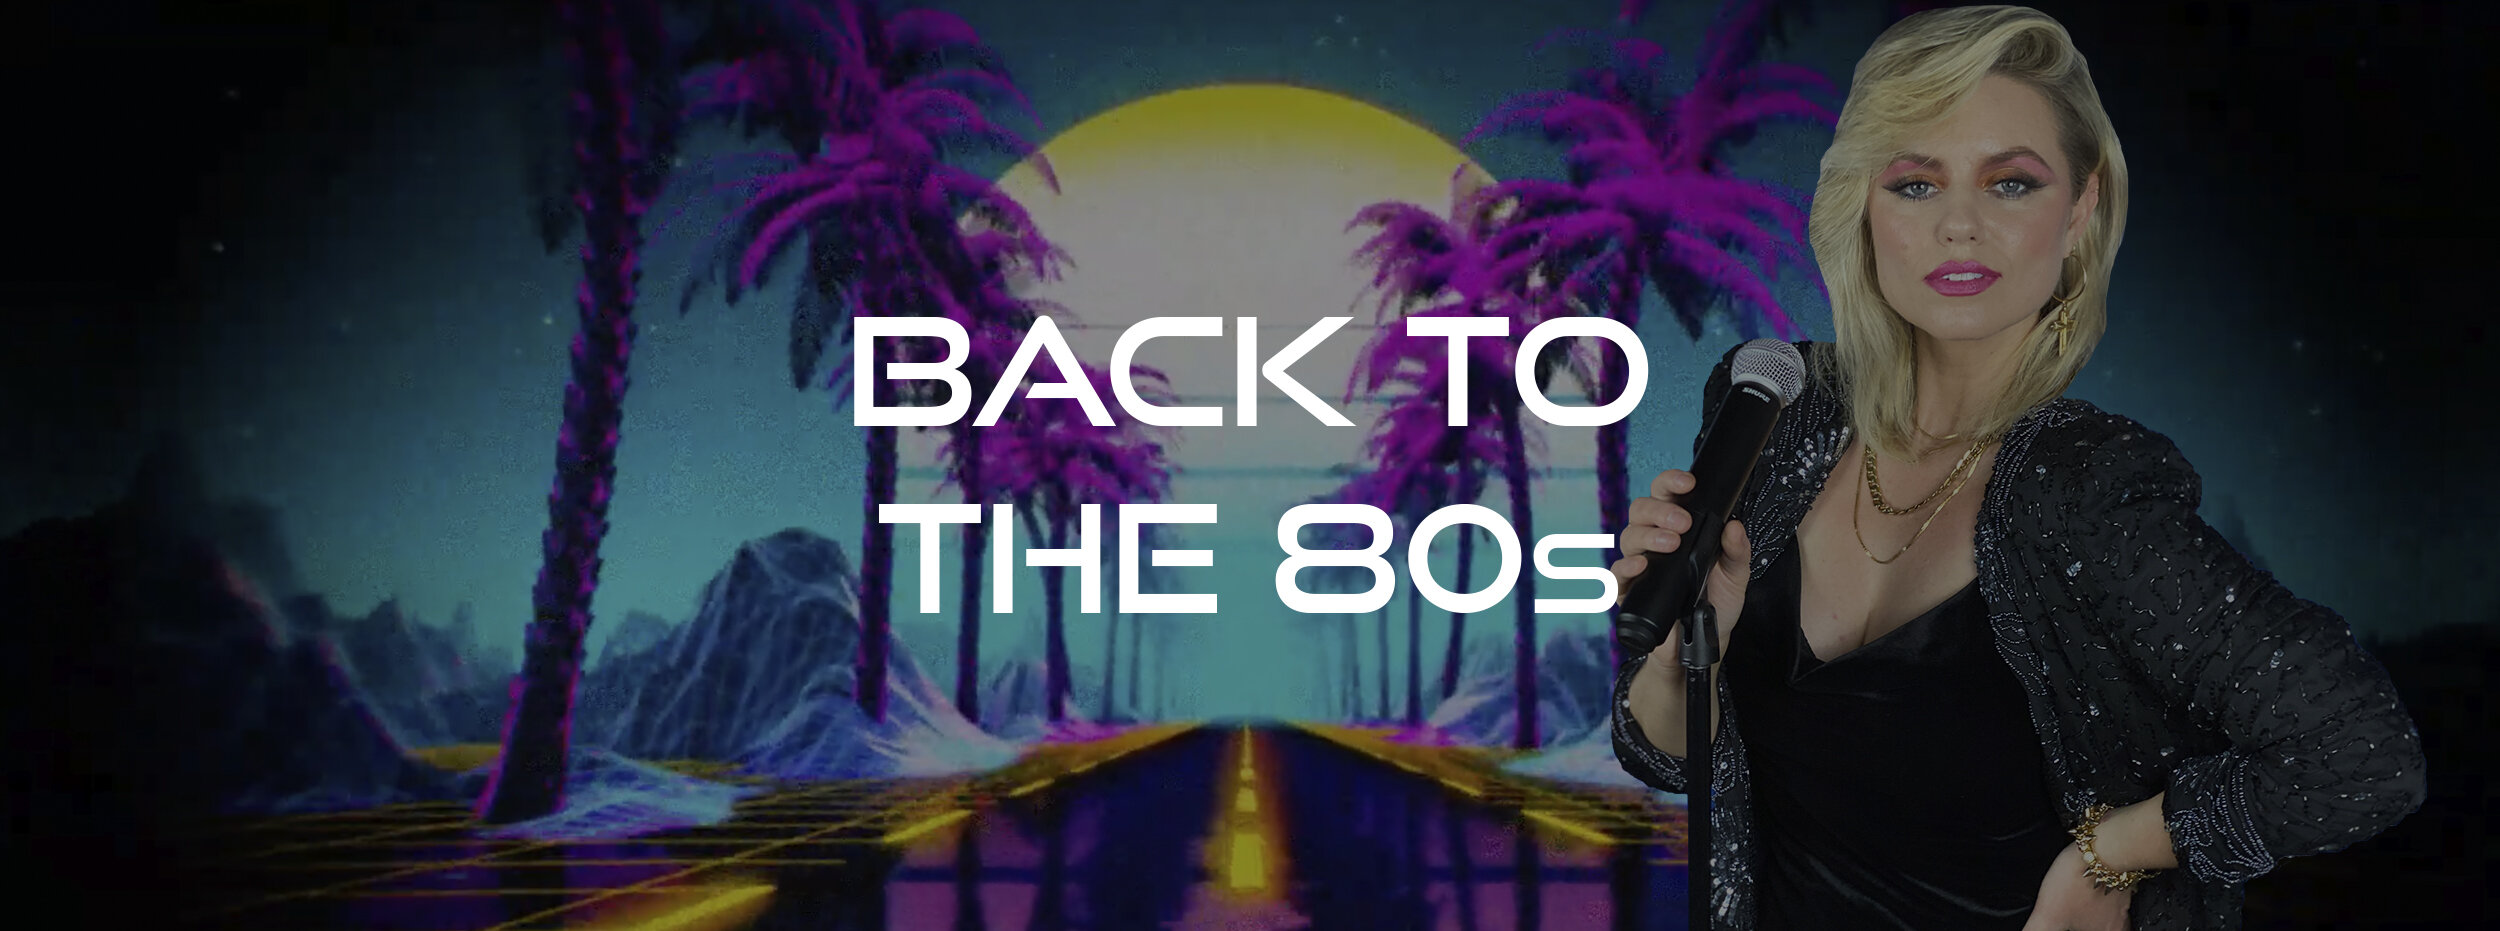 Back to the 80s | 1980s